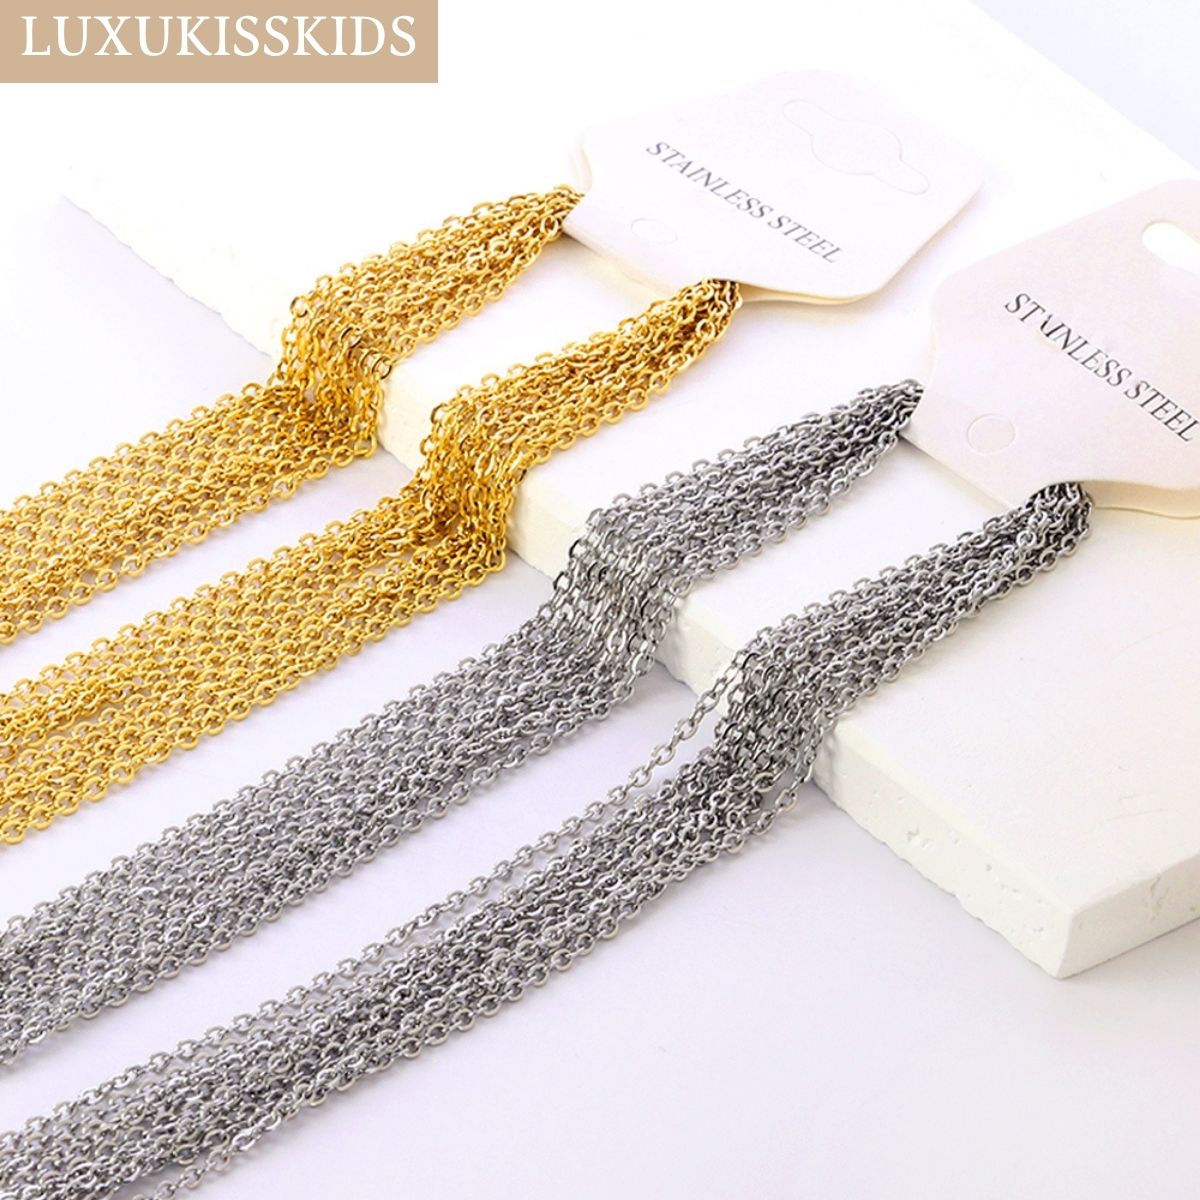 LUXUKISSKIDS Stainless Steel Necklace Chains Woman 10pcs/lot Bulk Wholesale DIY Rolo 2mm Chain No Fade Choker For Jewelry Making